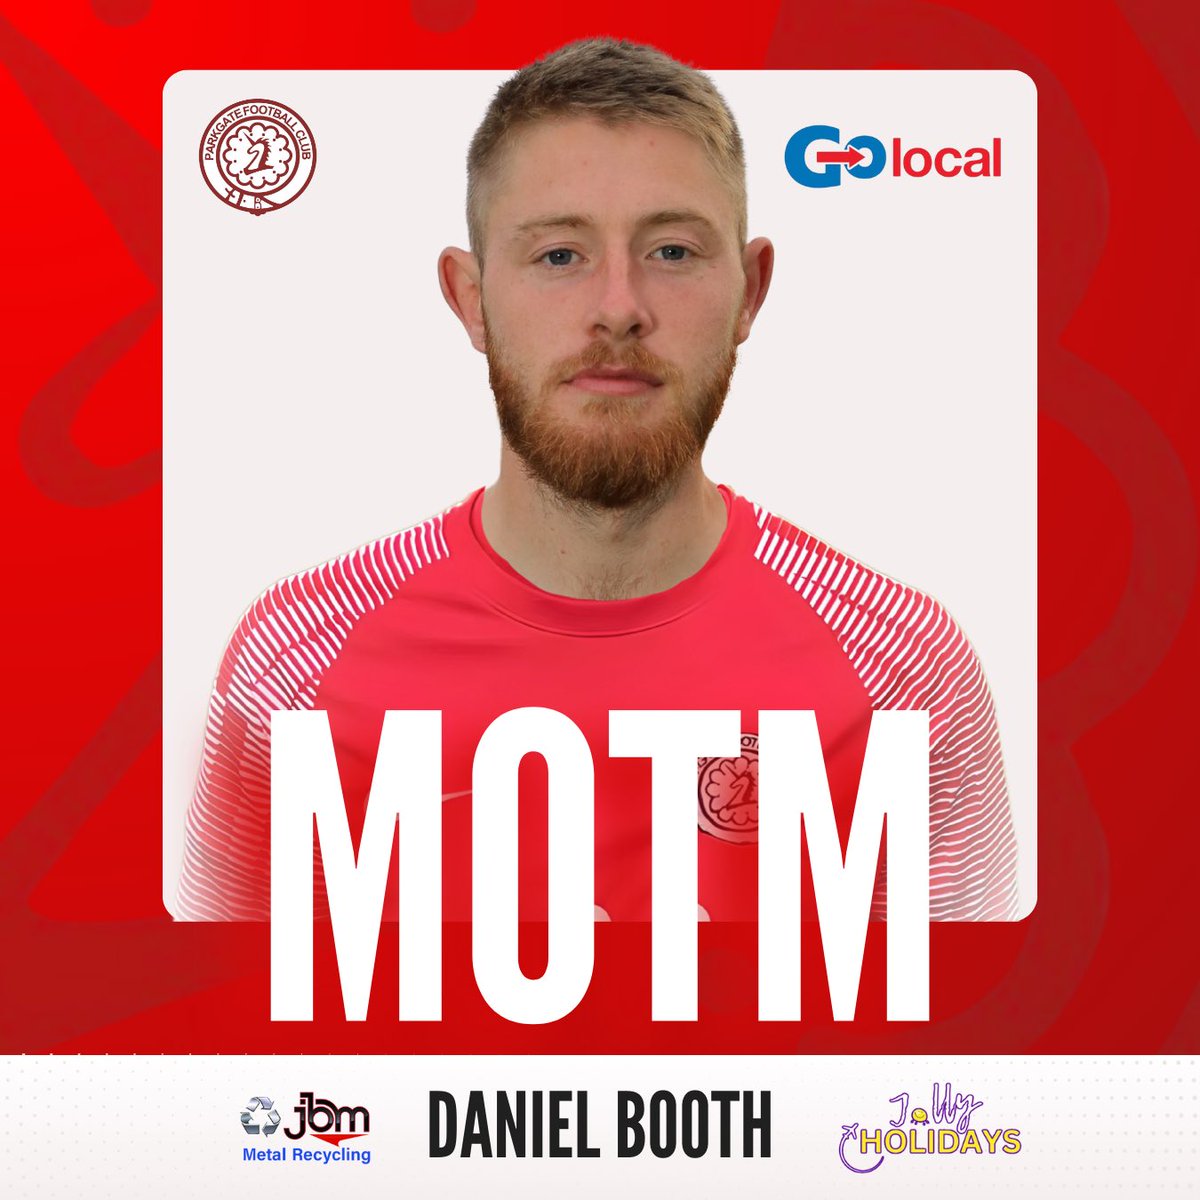 🏆 This evening’s Go Local Man of the Match was Danny Booth. Dominant display in the centre of the pitch from tonight’s No.8 Kindly sponsored by @JollyHolidays3 🤝 #steelmen